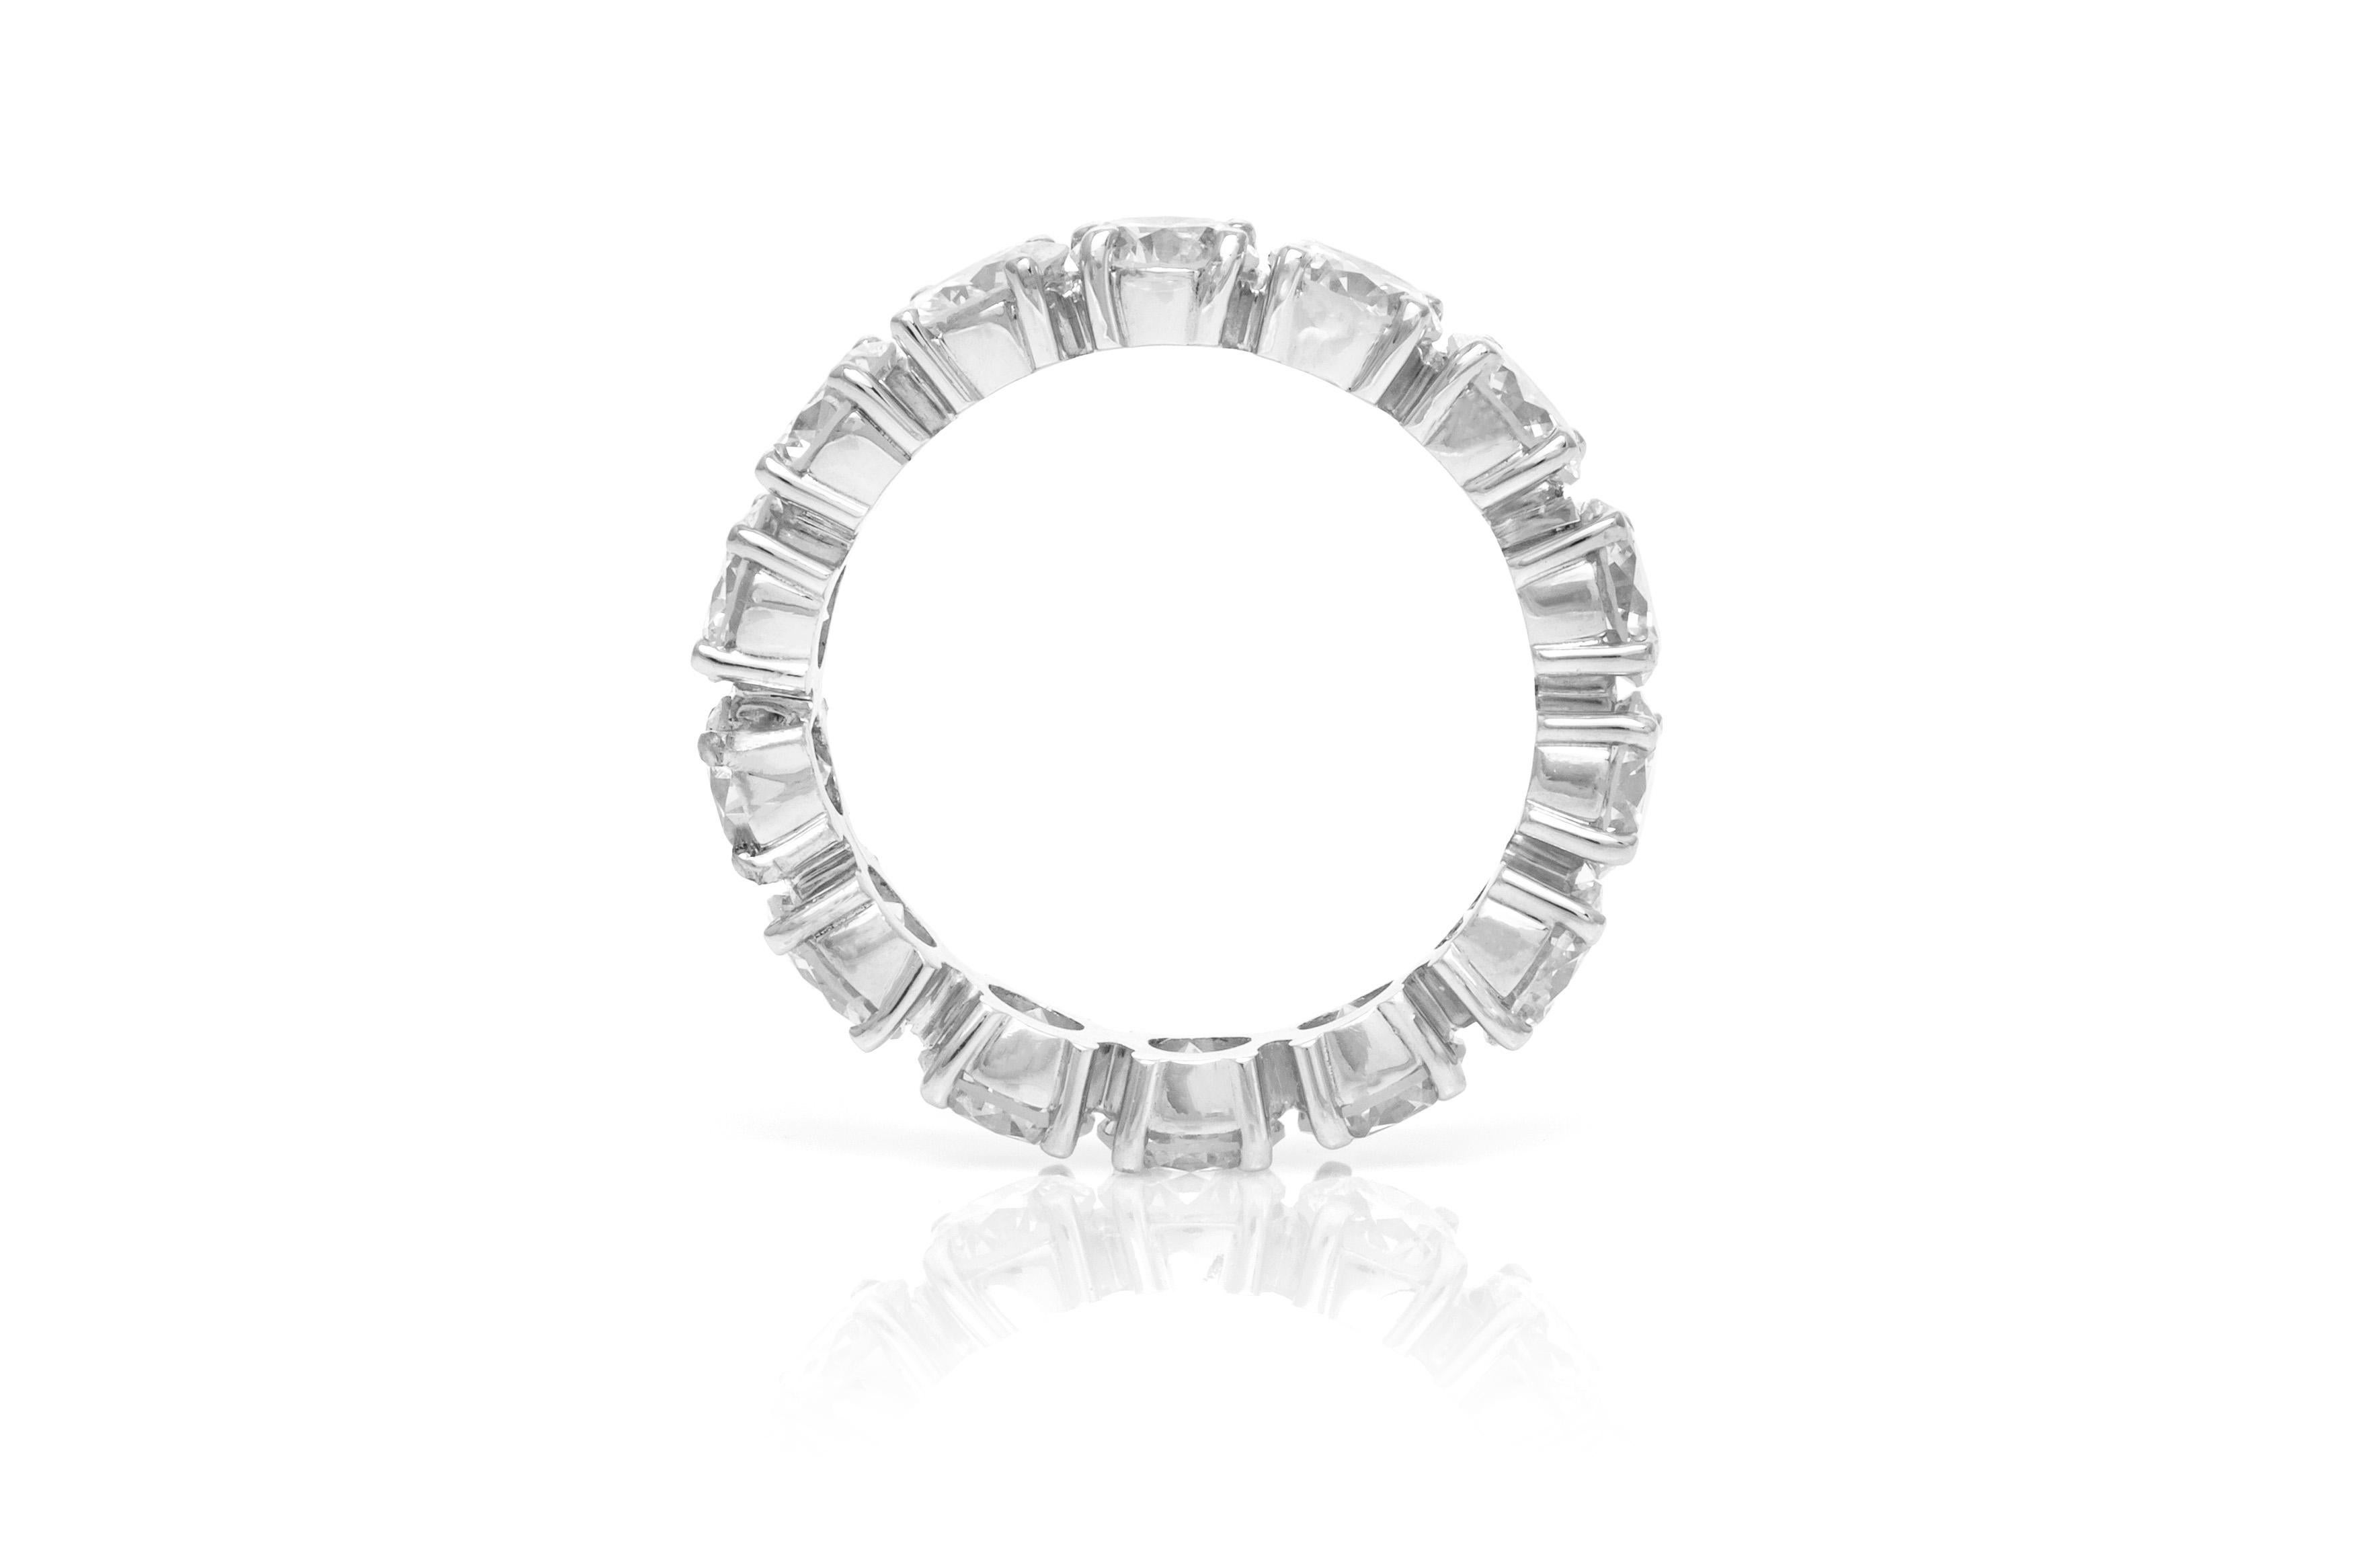 The ring is finely crafted in platinum with round diamonds weighing approximately total of 7.00 carat.